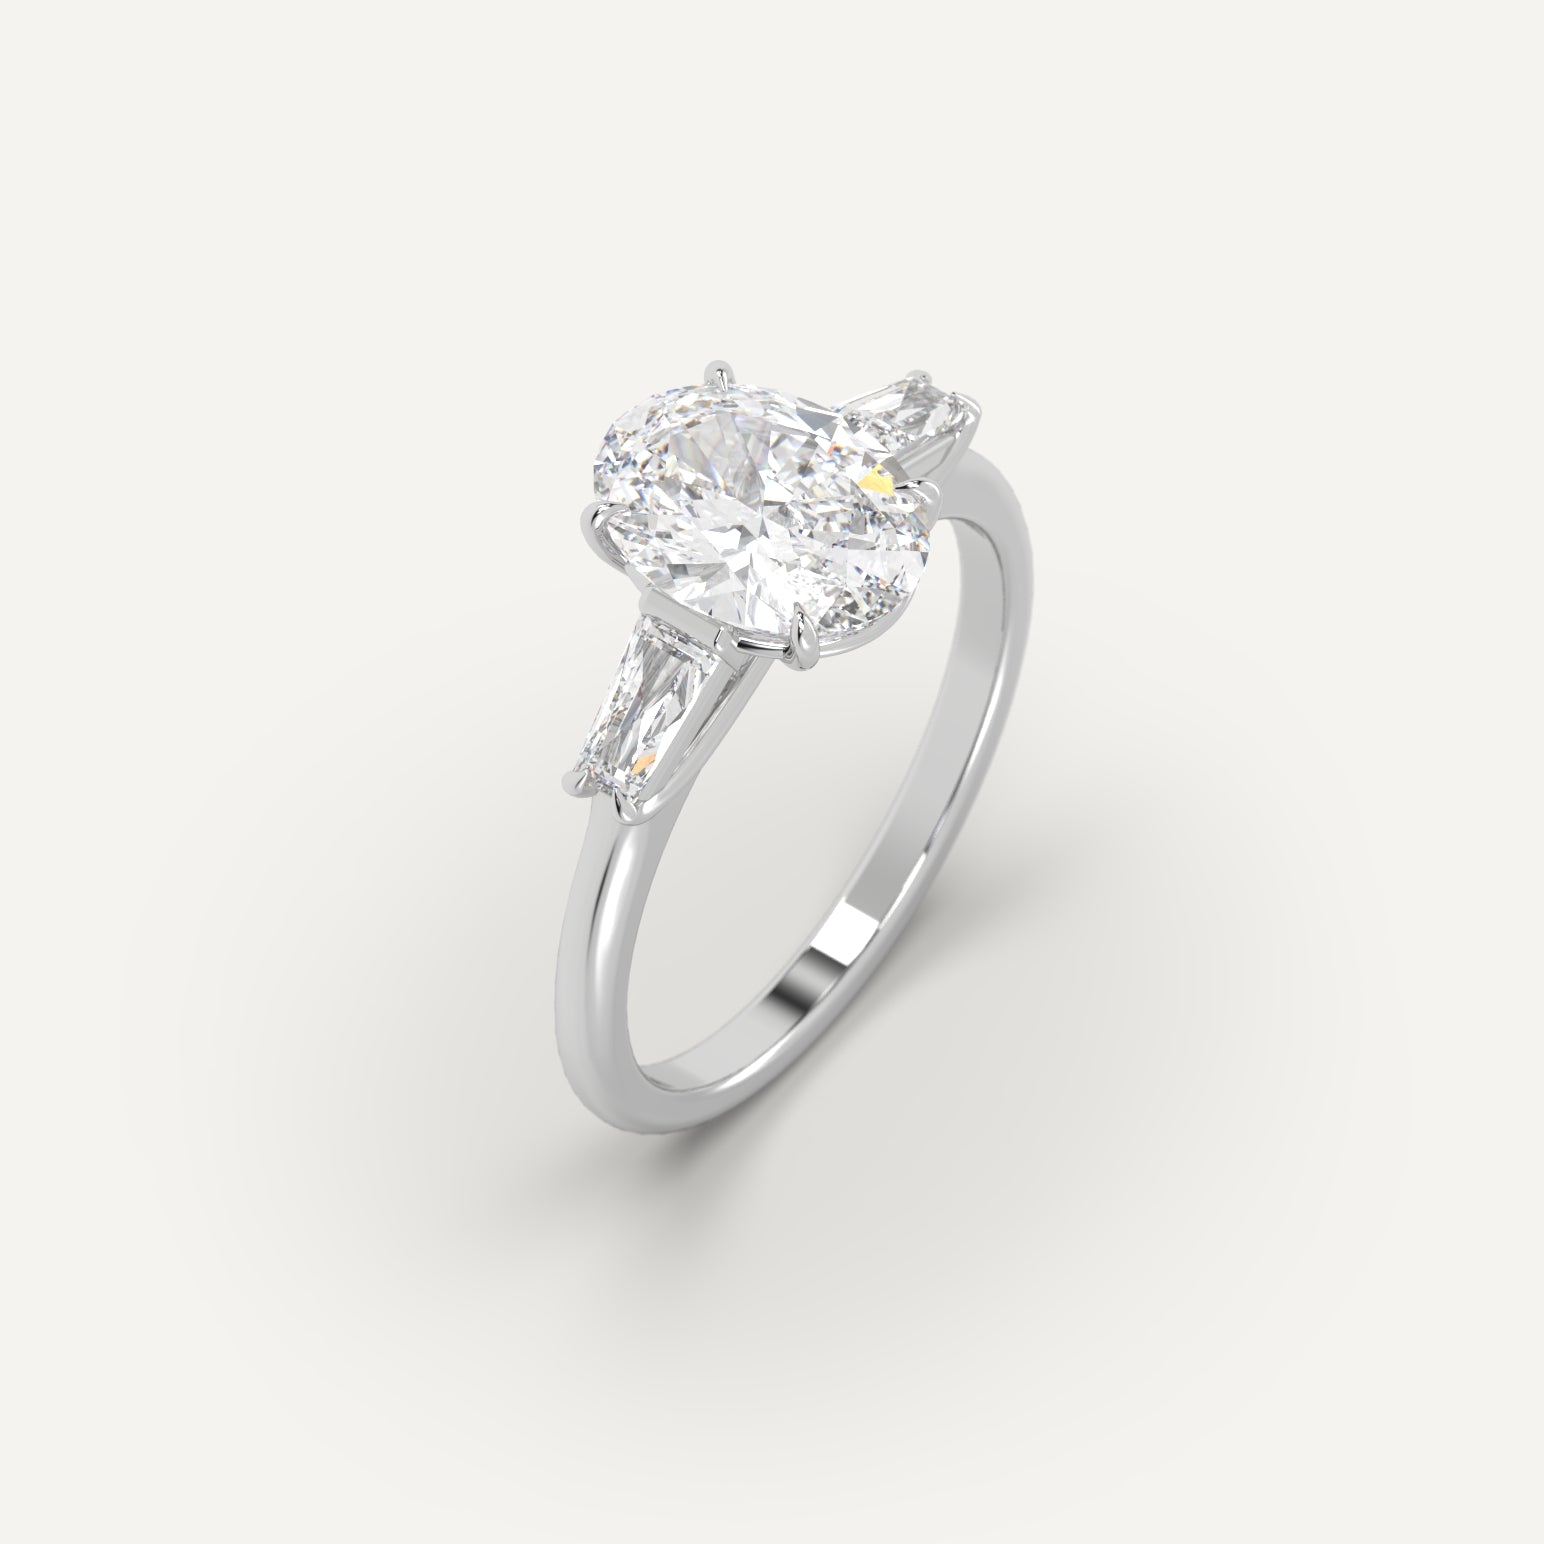 3 carat Oval Cut Engagement Ring in 14k White Gold